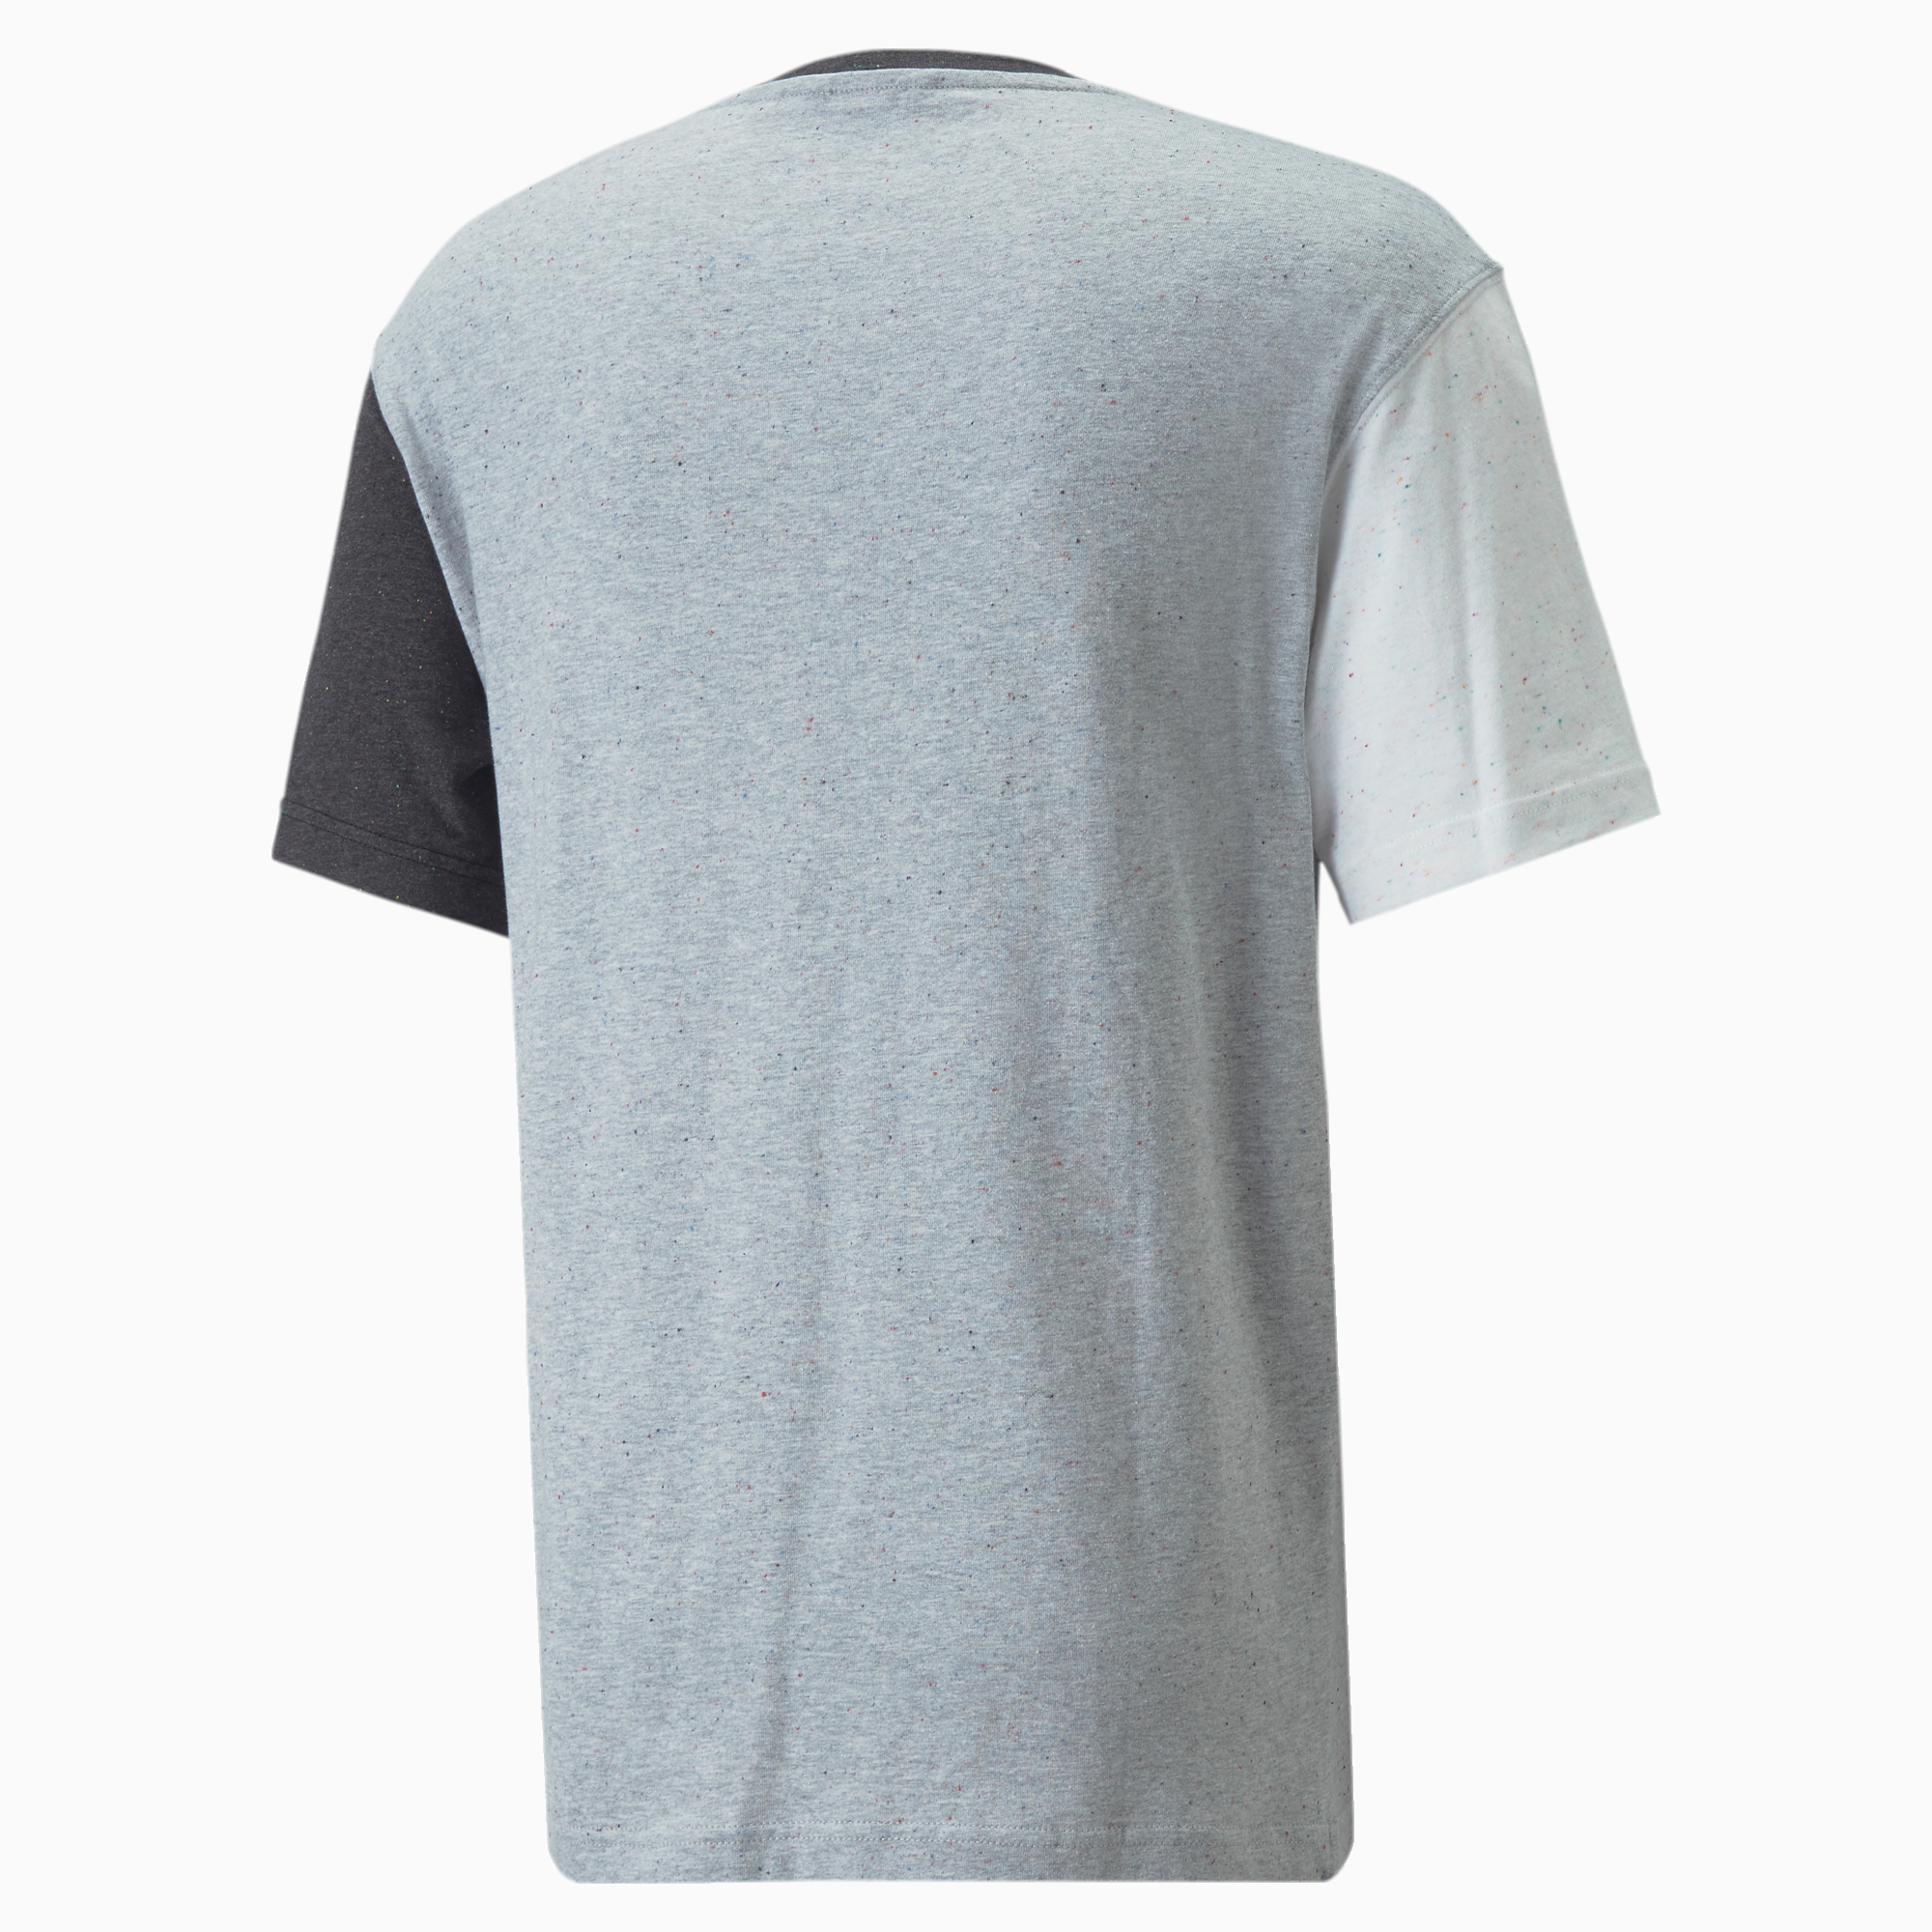 RE:Collection Relaxed Men's Tee, Light Gray Heather